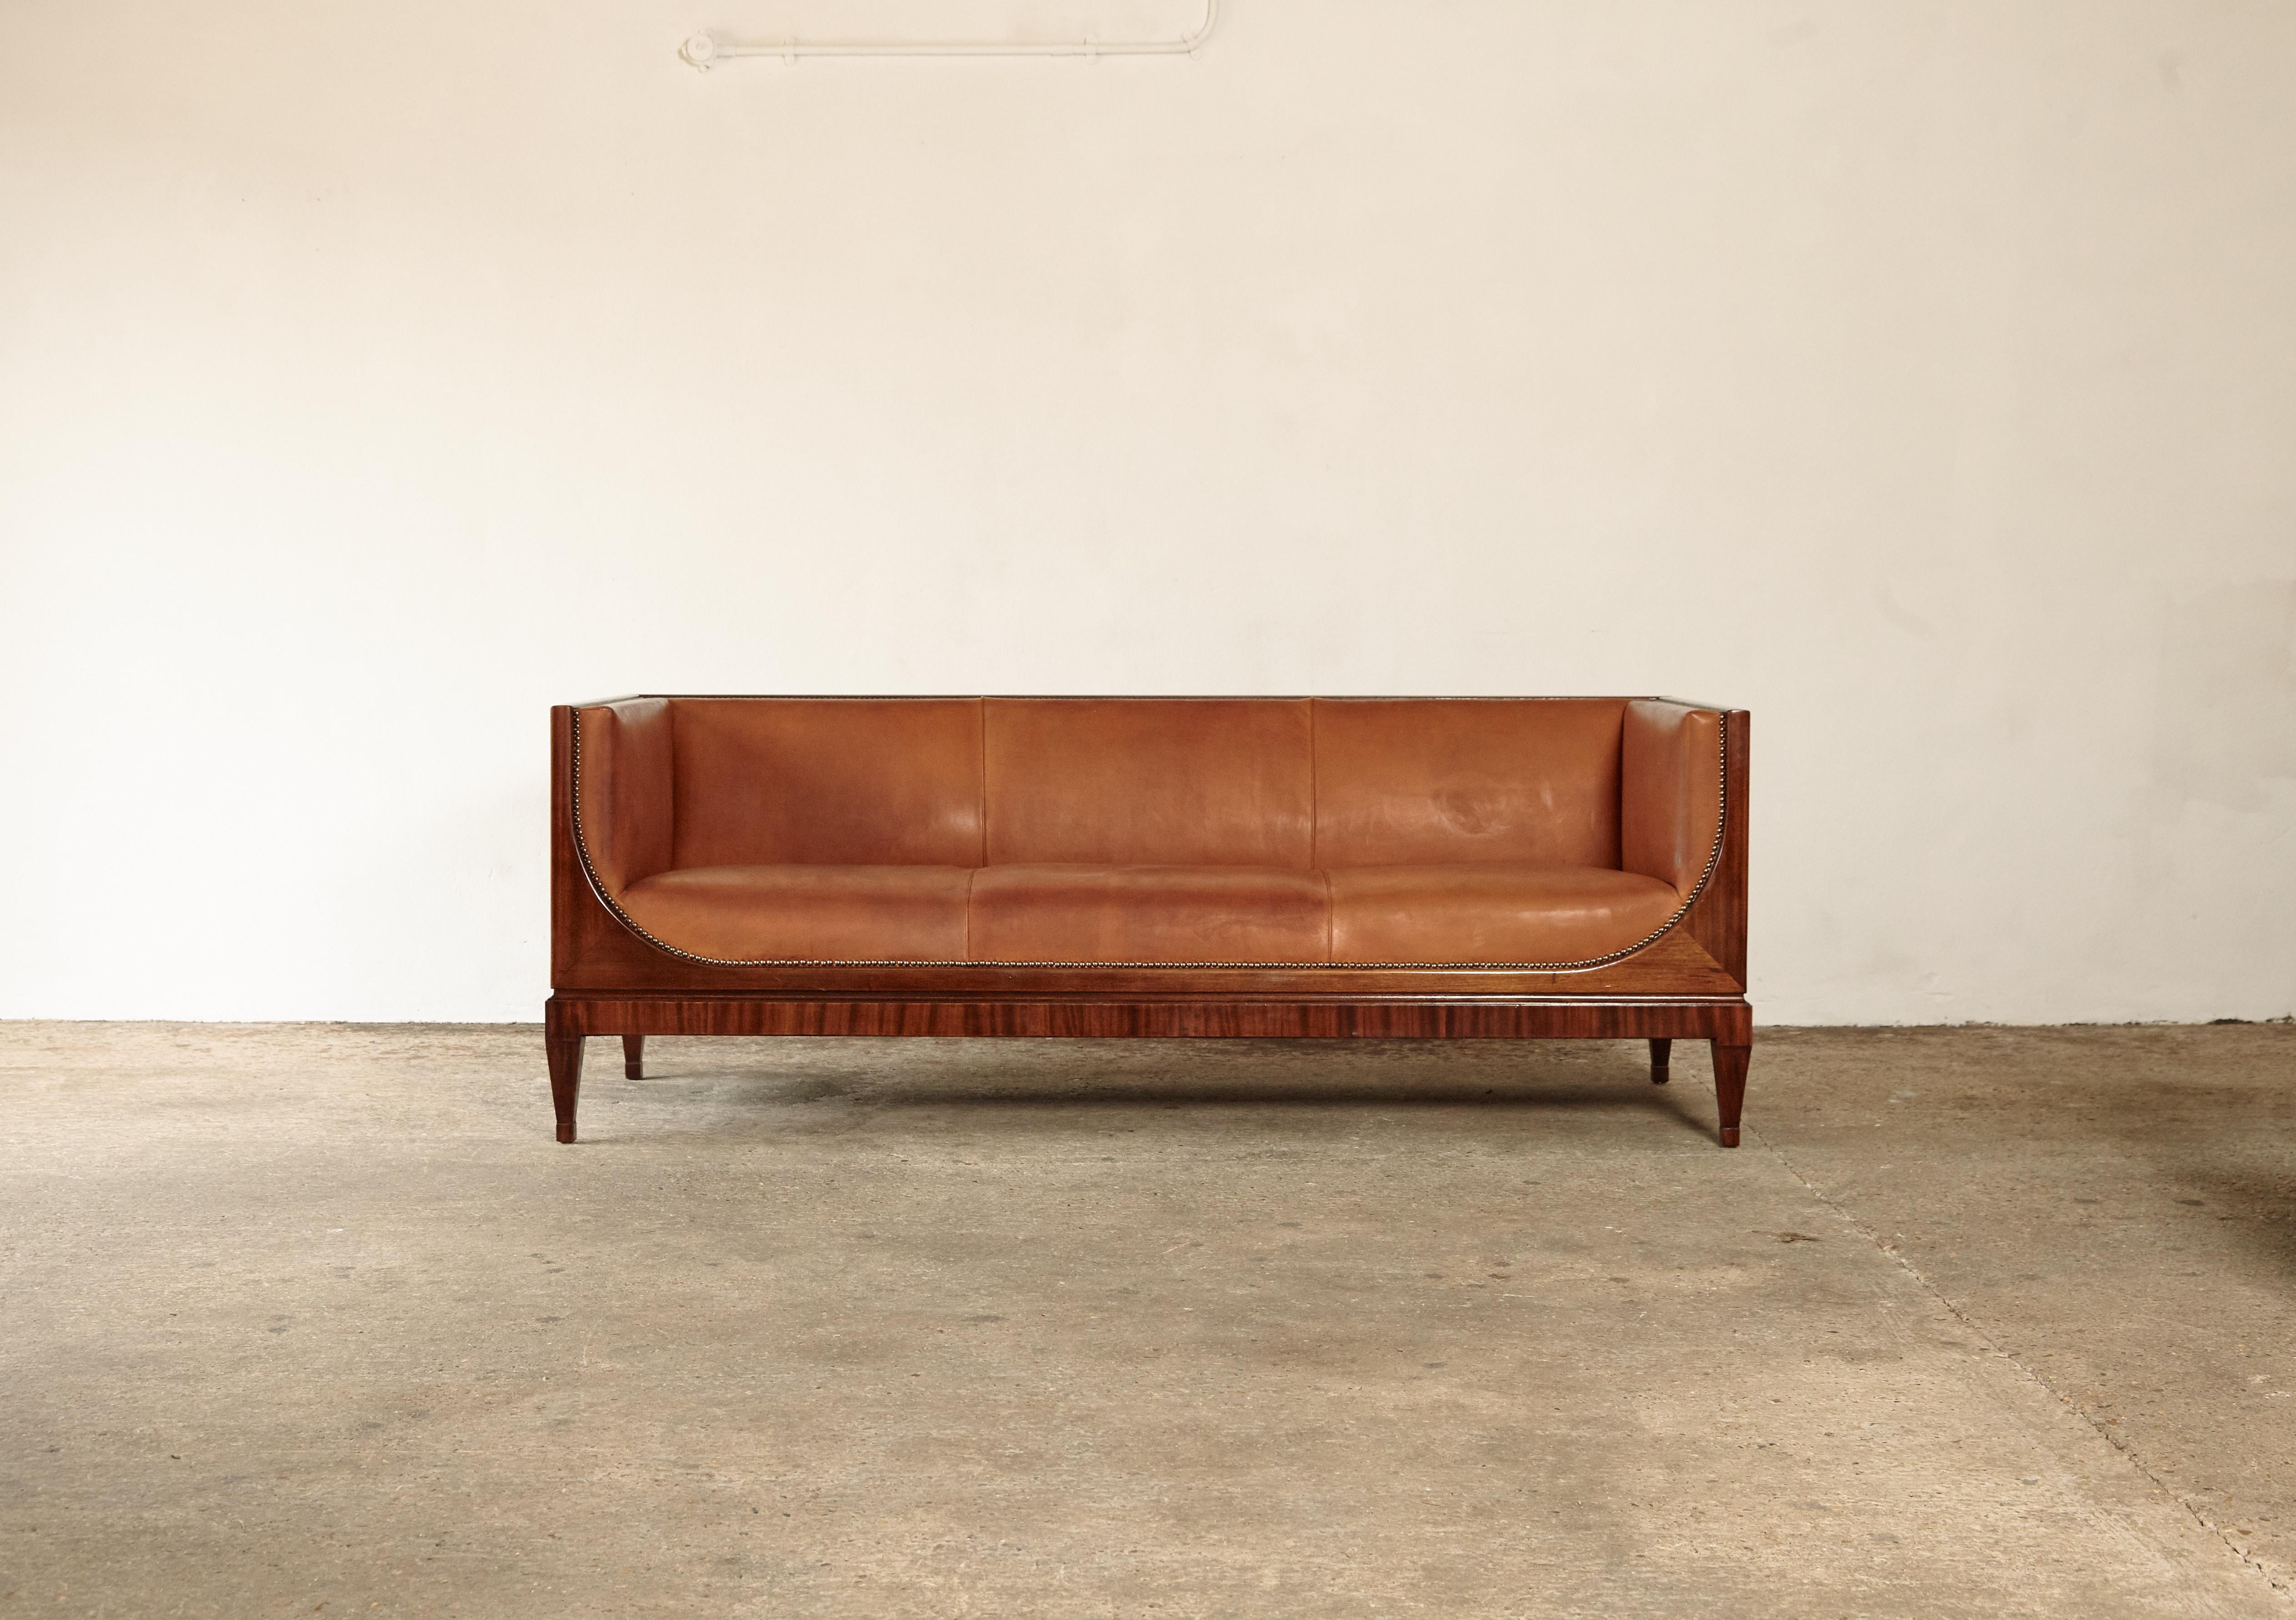 Rare Frits Henningsen box sofa, Denmark, 1940s-1950s. Designed and produced by Frits Henningsen, Copenhagen. Mahogany frame and later leather upholstery. In very good vintage condition with minor signs of use and wear relative to age. 

  